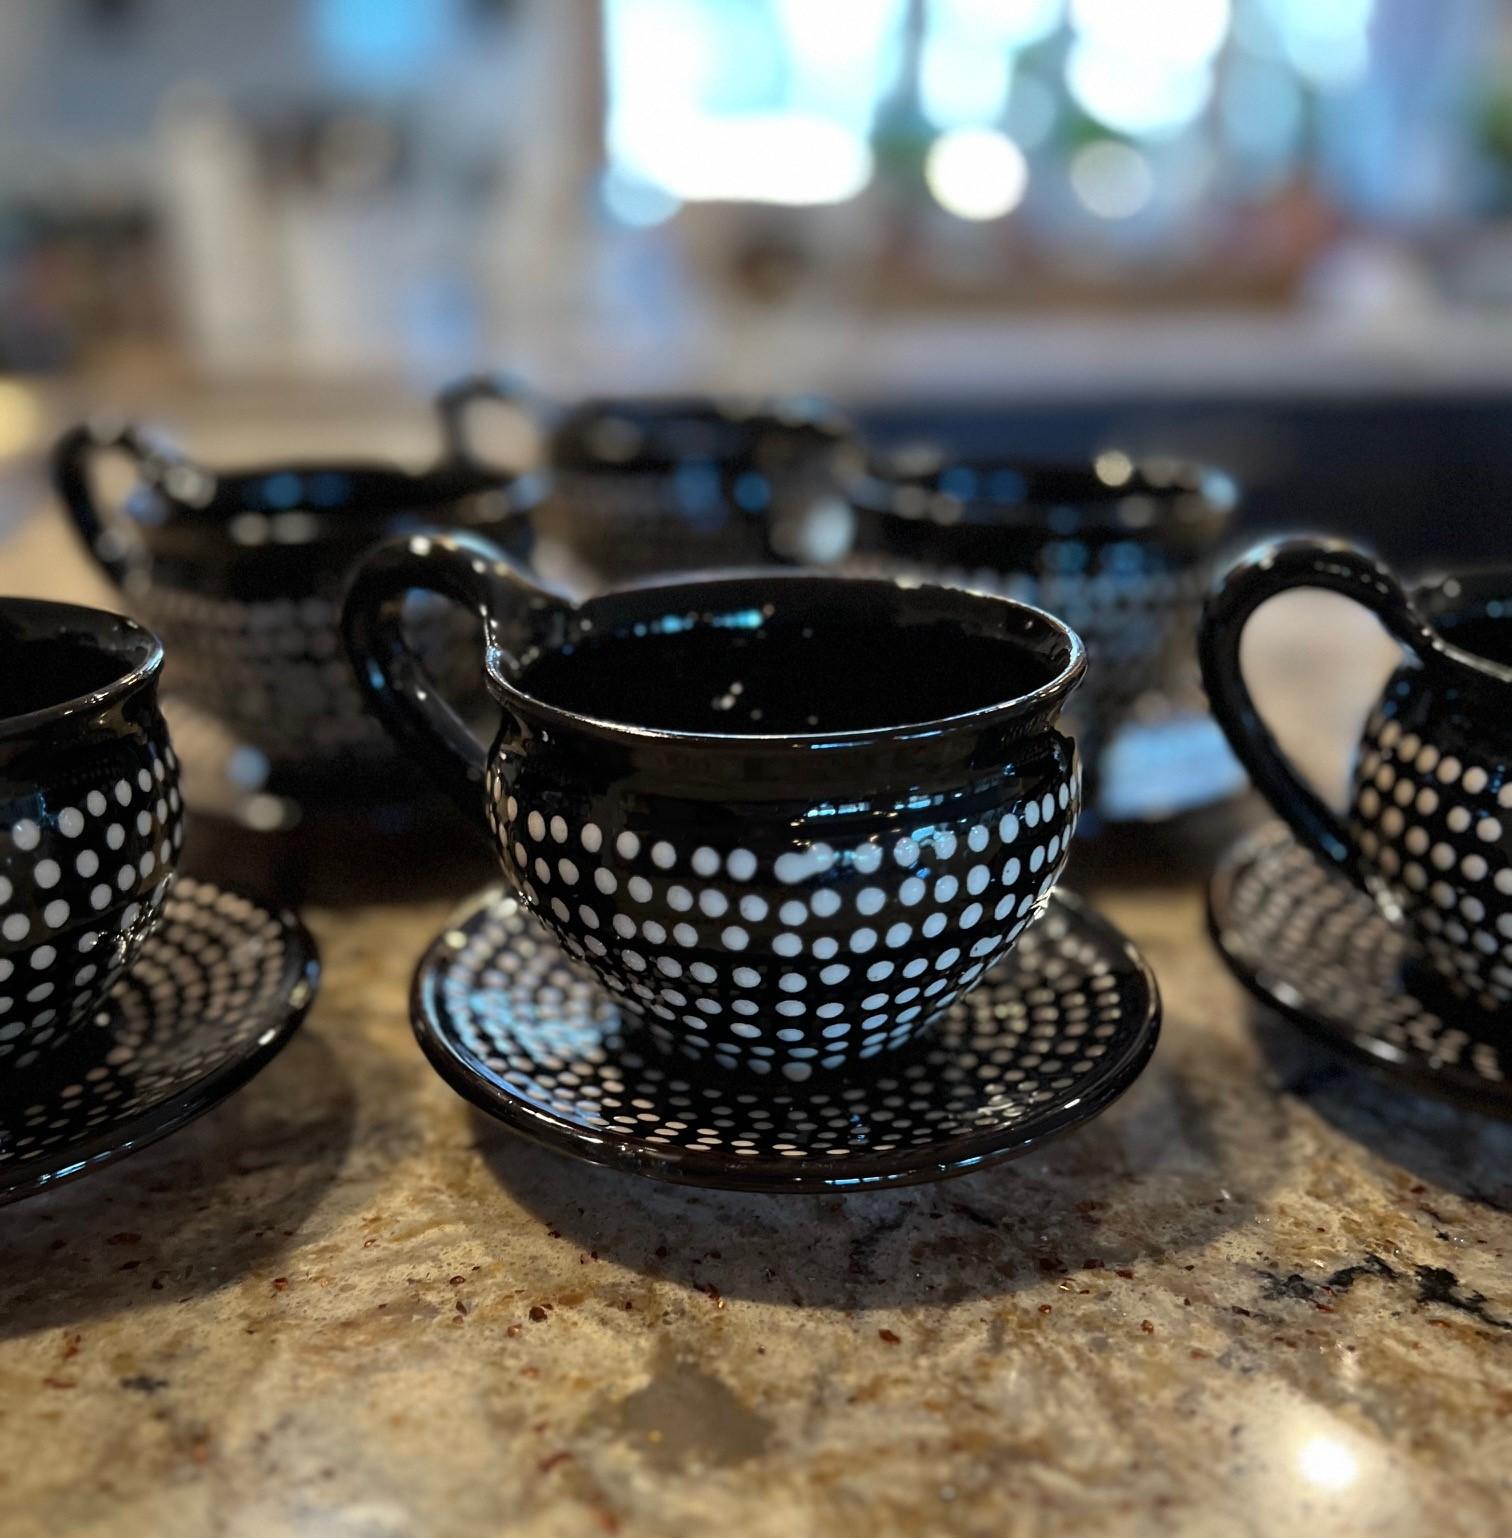 A set of 6 Hungarian Folk Art Red Ware tea cups and saucers by Imre Szűcs. A black/brown based glaze decorated with white dots. The undersides are signed by Imre Albert Szucs and marked Hungary. 

Dimensions:
Cup:
4.75